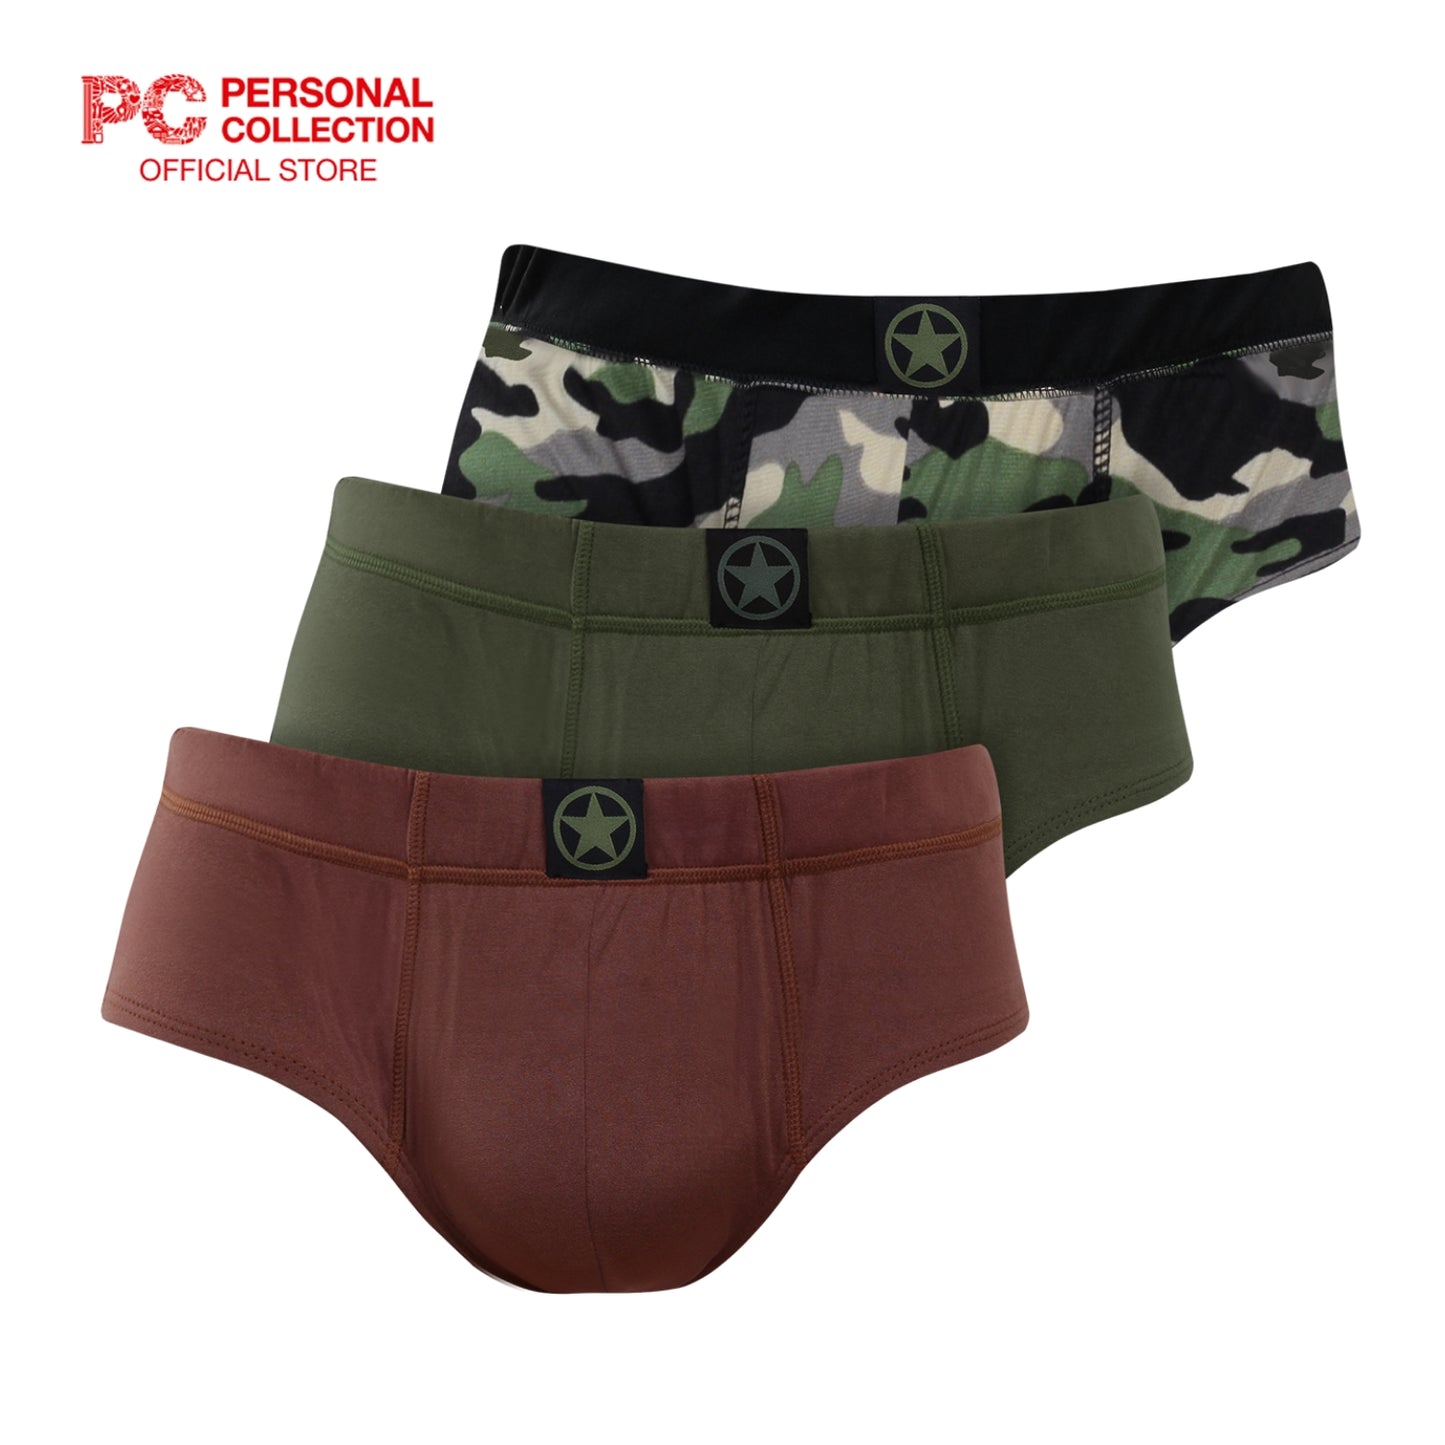 Alfa-1 Hipster Brief Aron Pack of 3